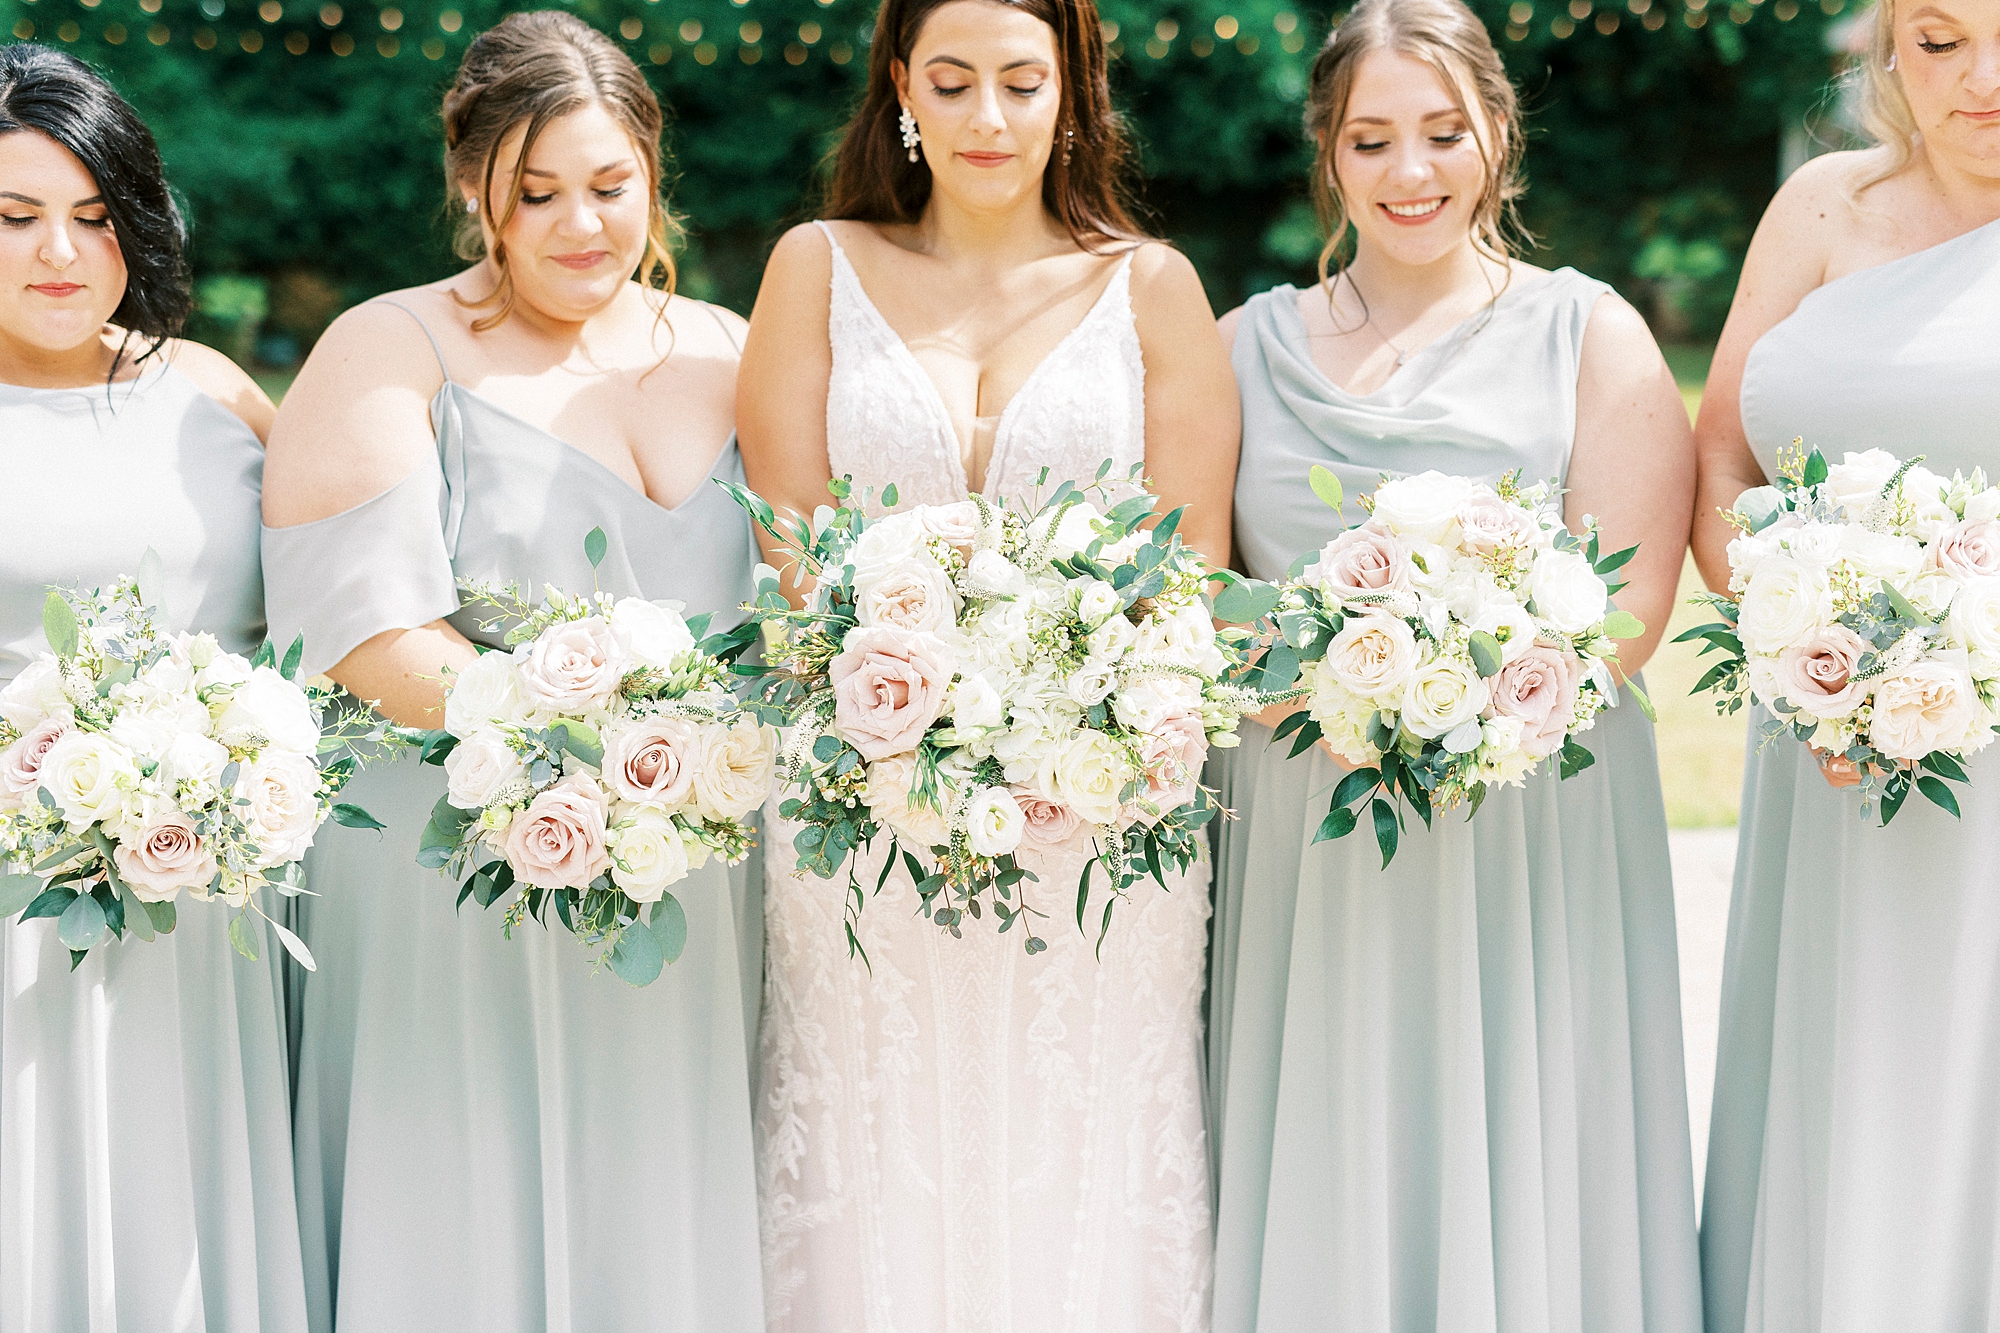 bride and bridesmaids hold bouquets of white and pink roses